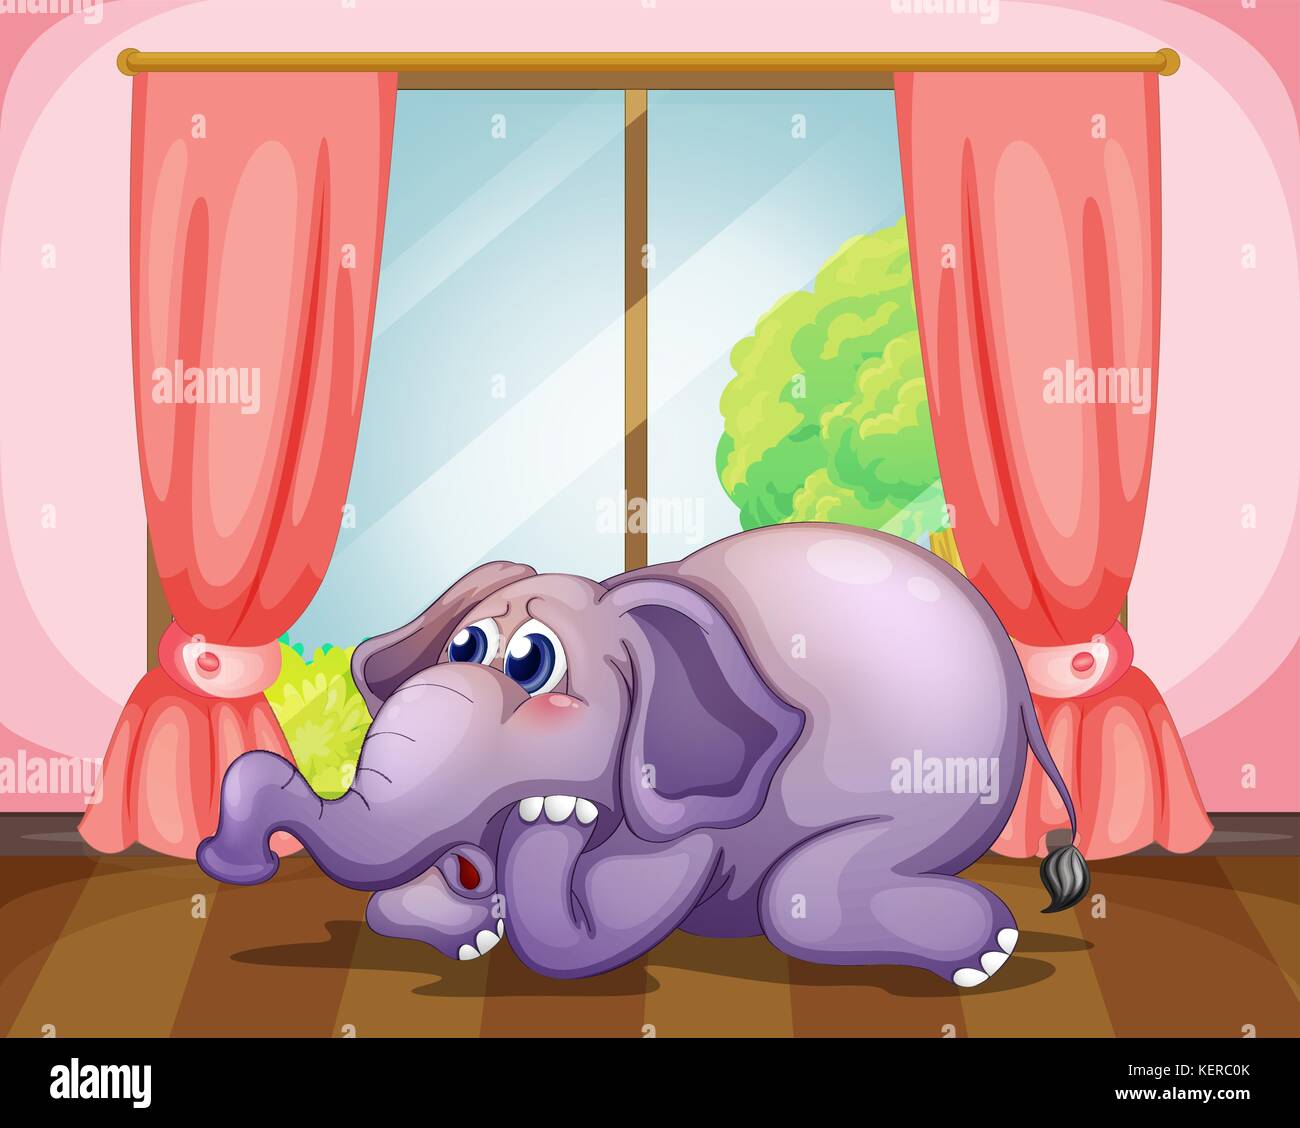 Illustration of a worried face of an elephant inside the room Stock Vector